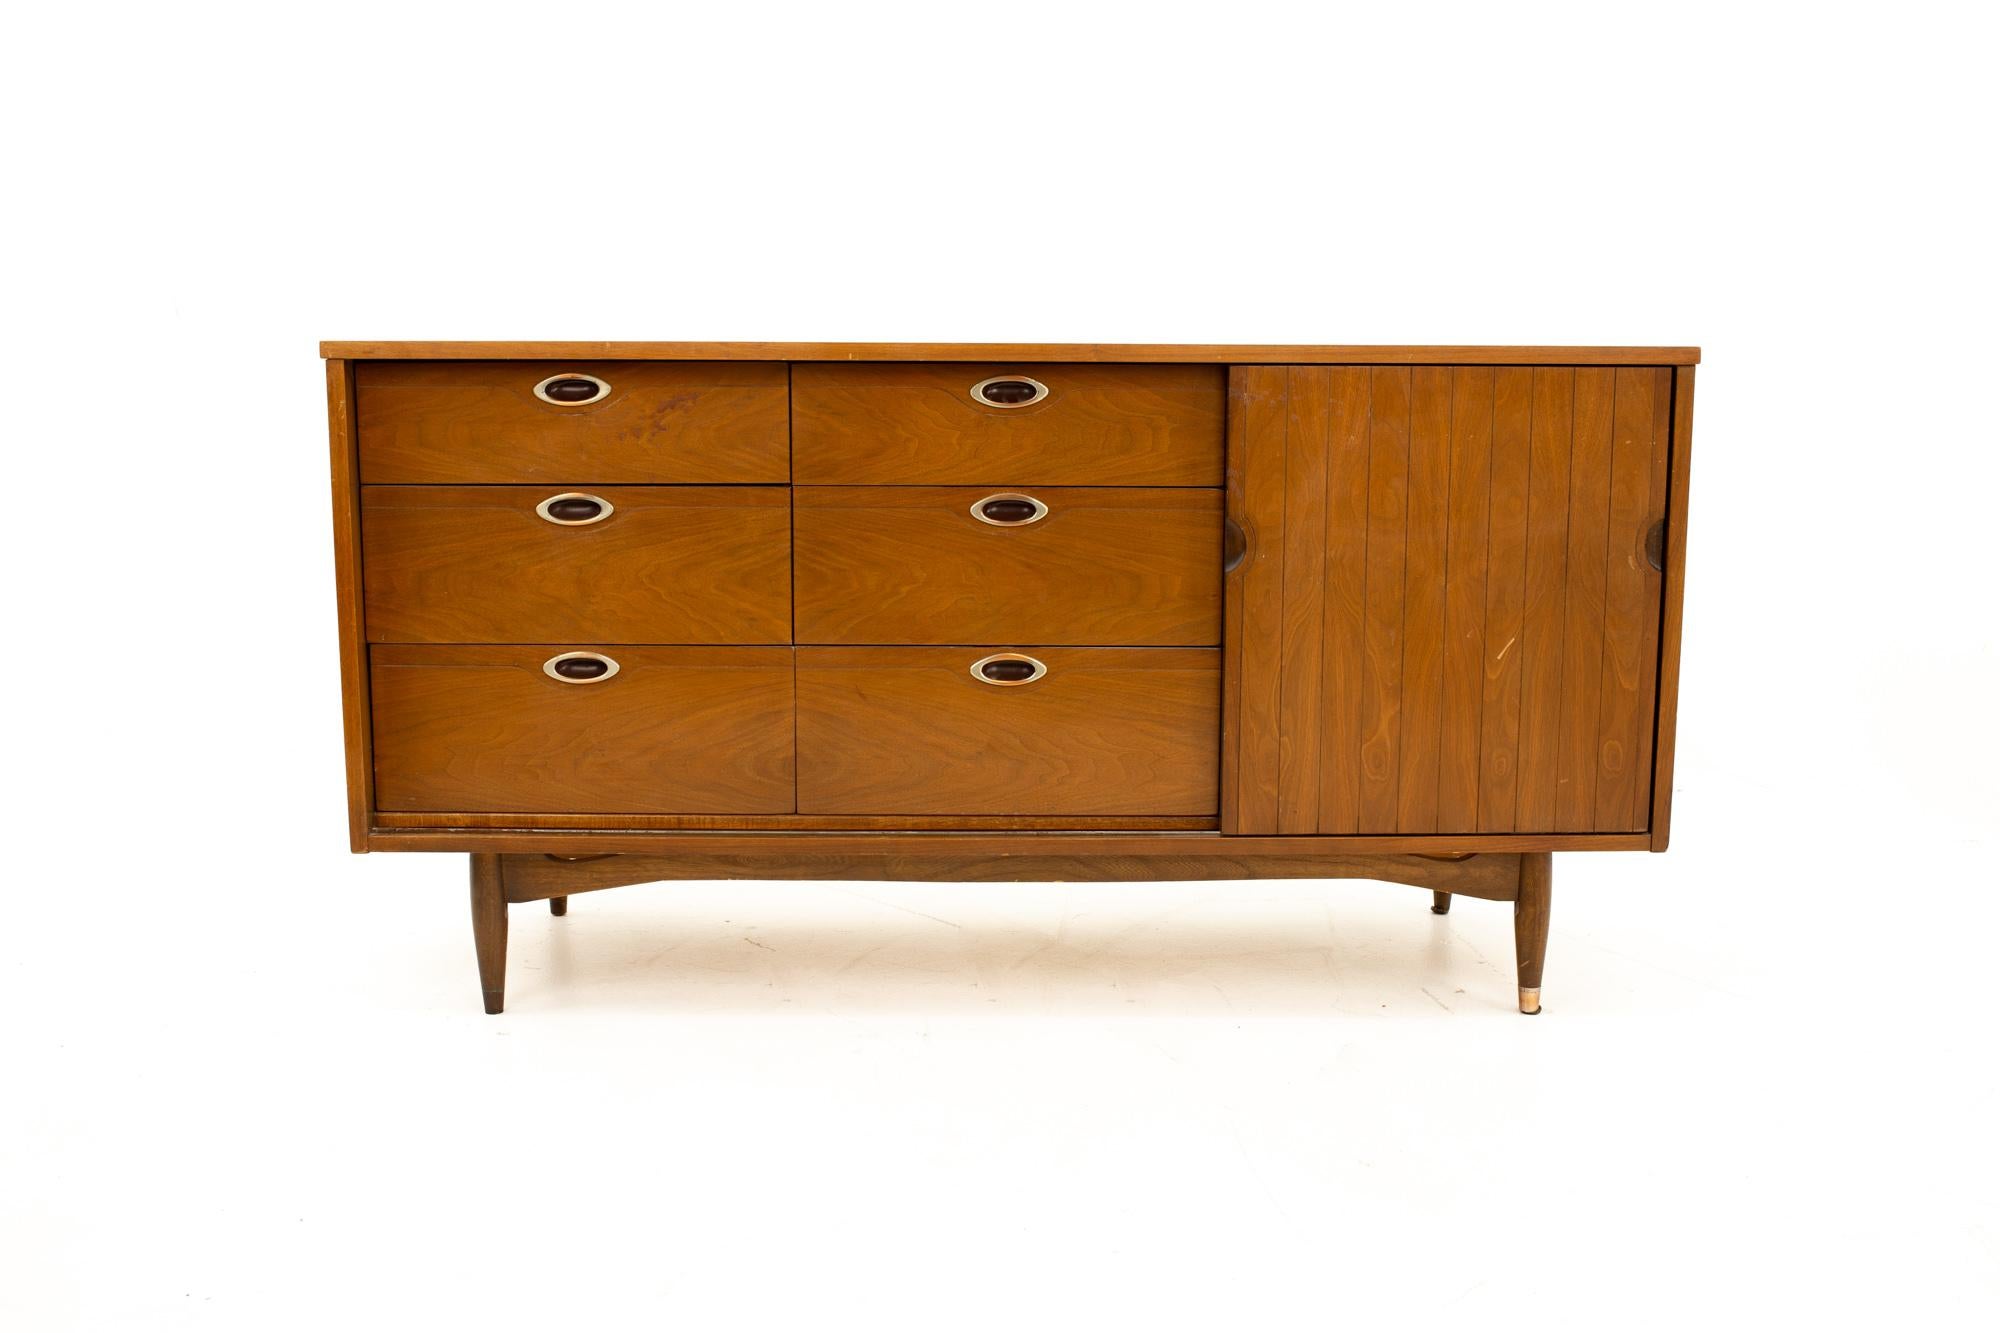 Mainline by Hooker Mid Century walnut 9-drawer lowboy dresser
Dresser measures: 60.5 wide x 19.5 deep x 30.5 high

All pieces of furniture can be had in what we call restored vintage condition. That means the piece is restored upon purchase so it’s